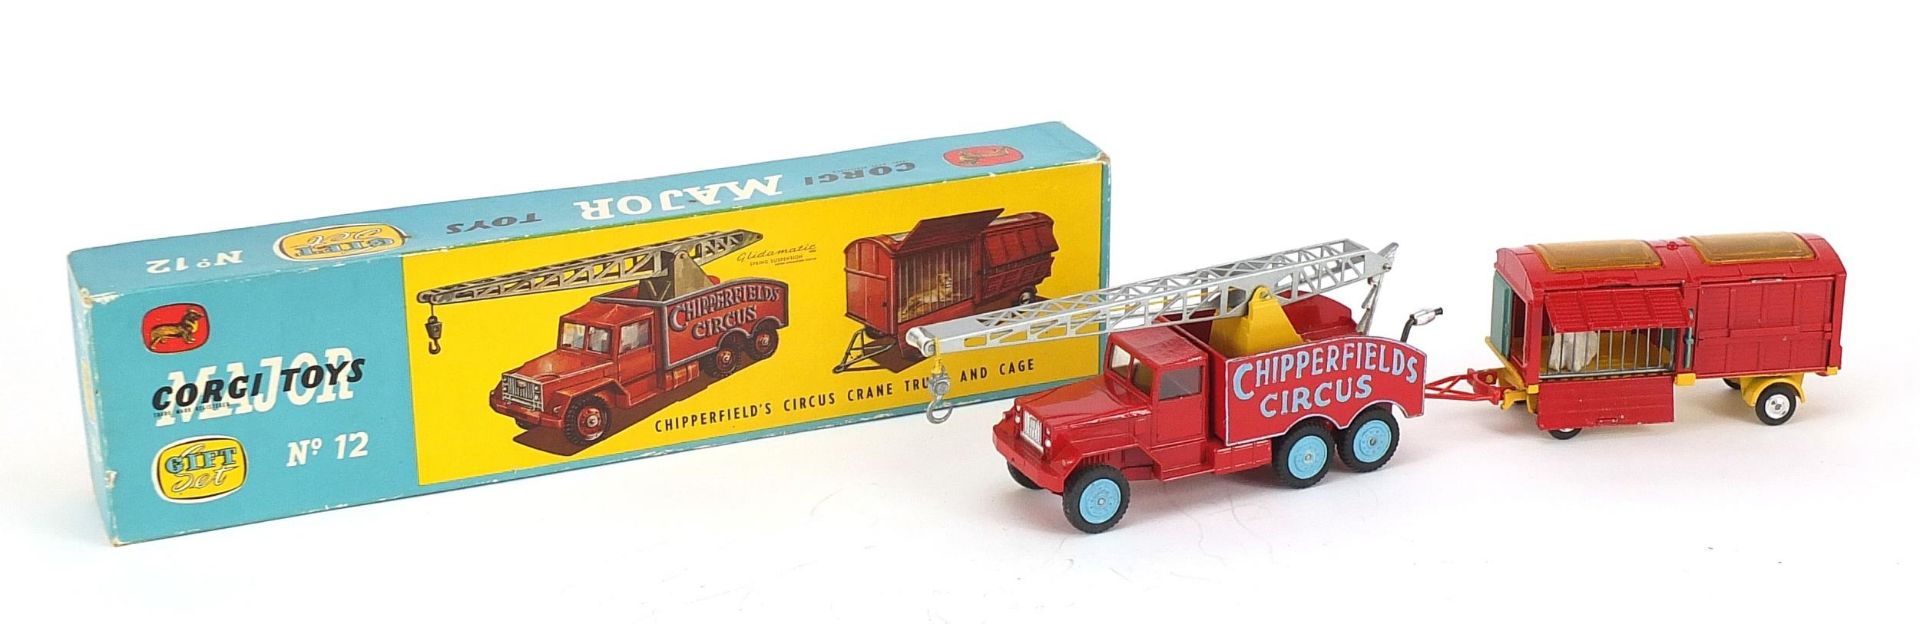 Corgi Toys Major Chipperfield's Circus crane, truck and cage with box, gift set no 12